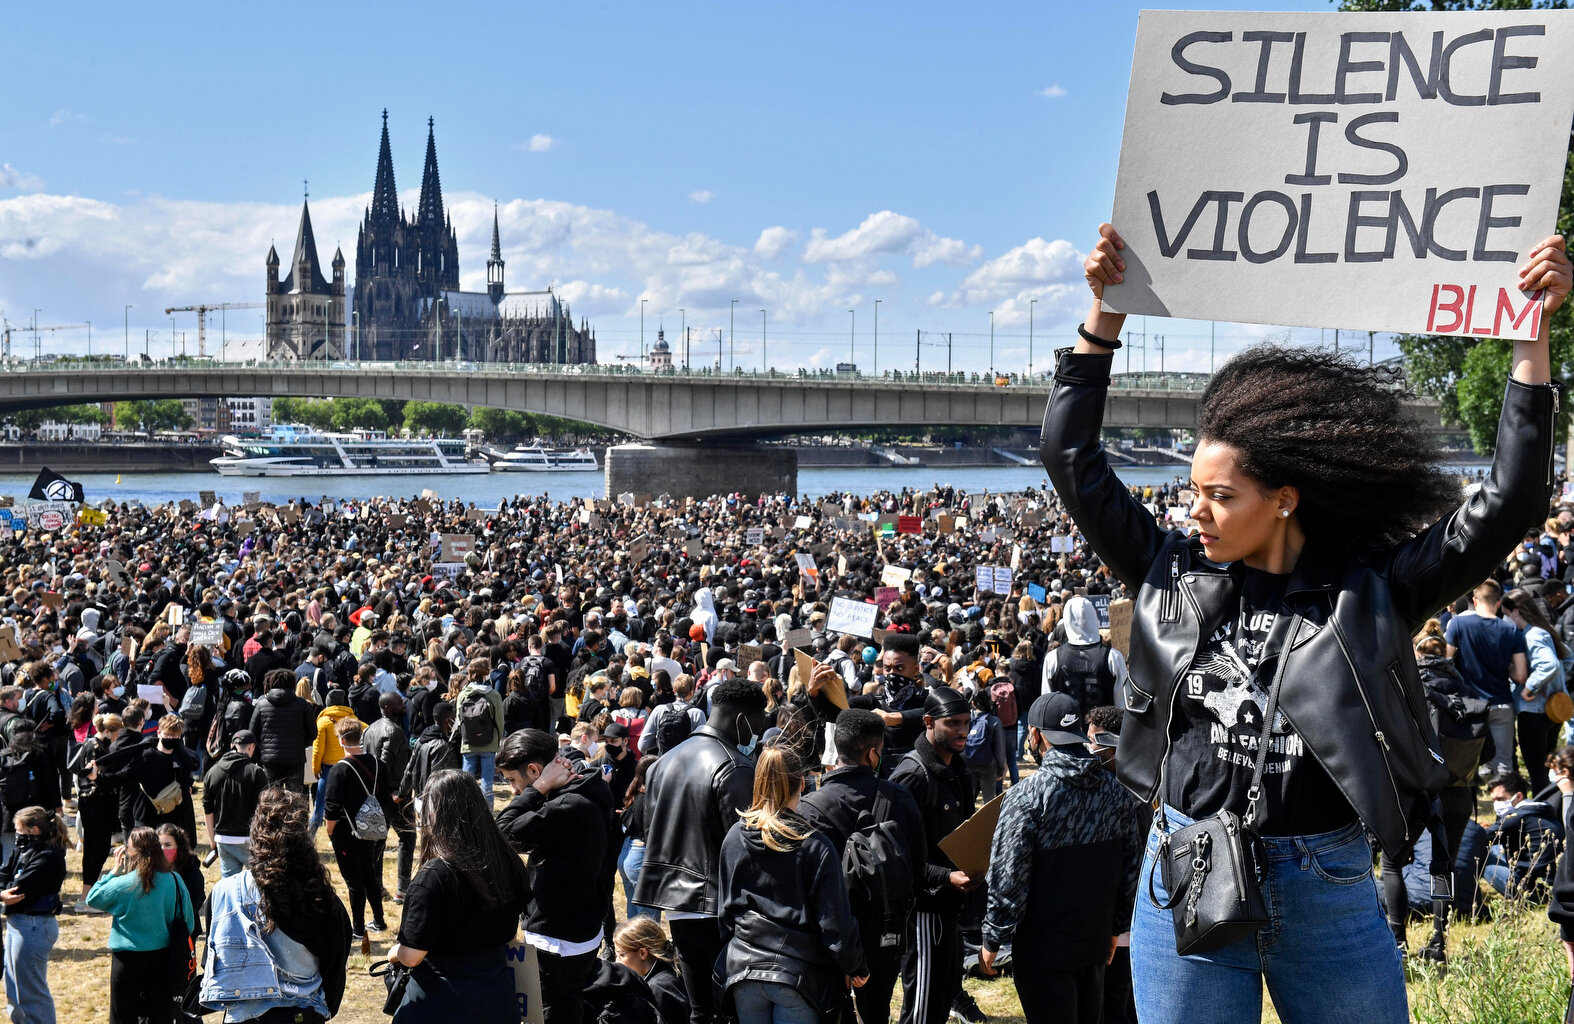  Thousands of people demonstrate in Cologne, Germany, Saturday June 6, 2020, to protest against racism and the recent killing of George Floyd by police officers in Minneapolis, USA. (AP Photo/Martin Meissner) 